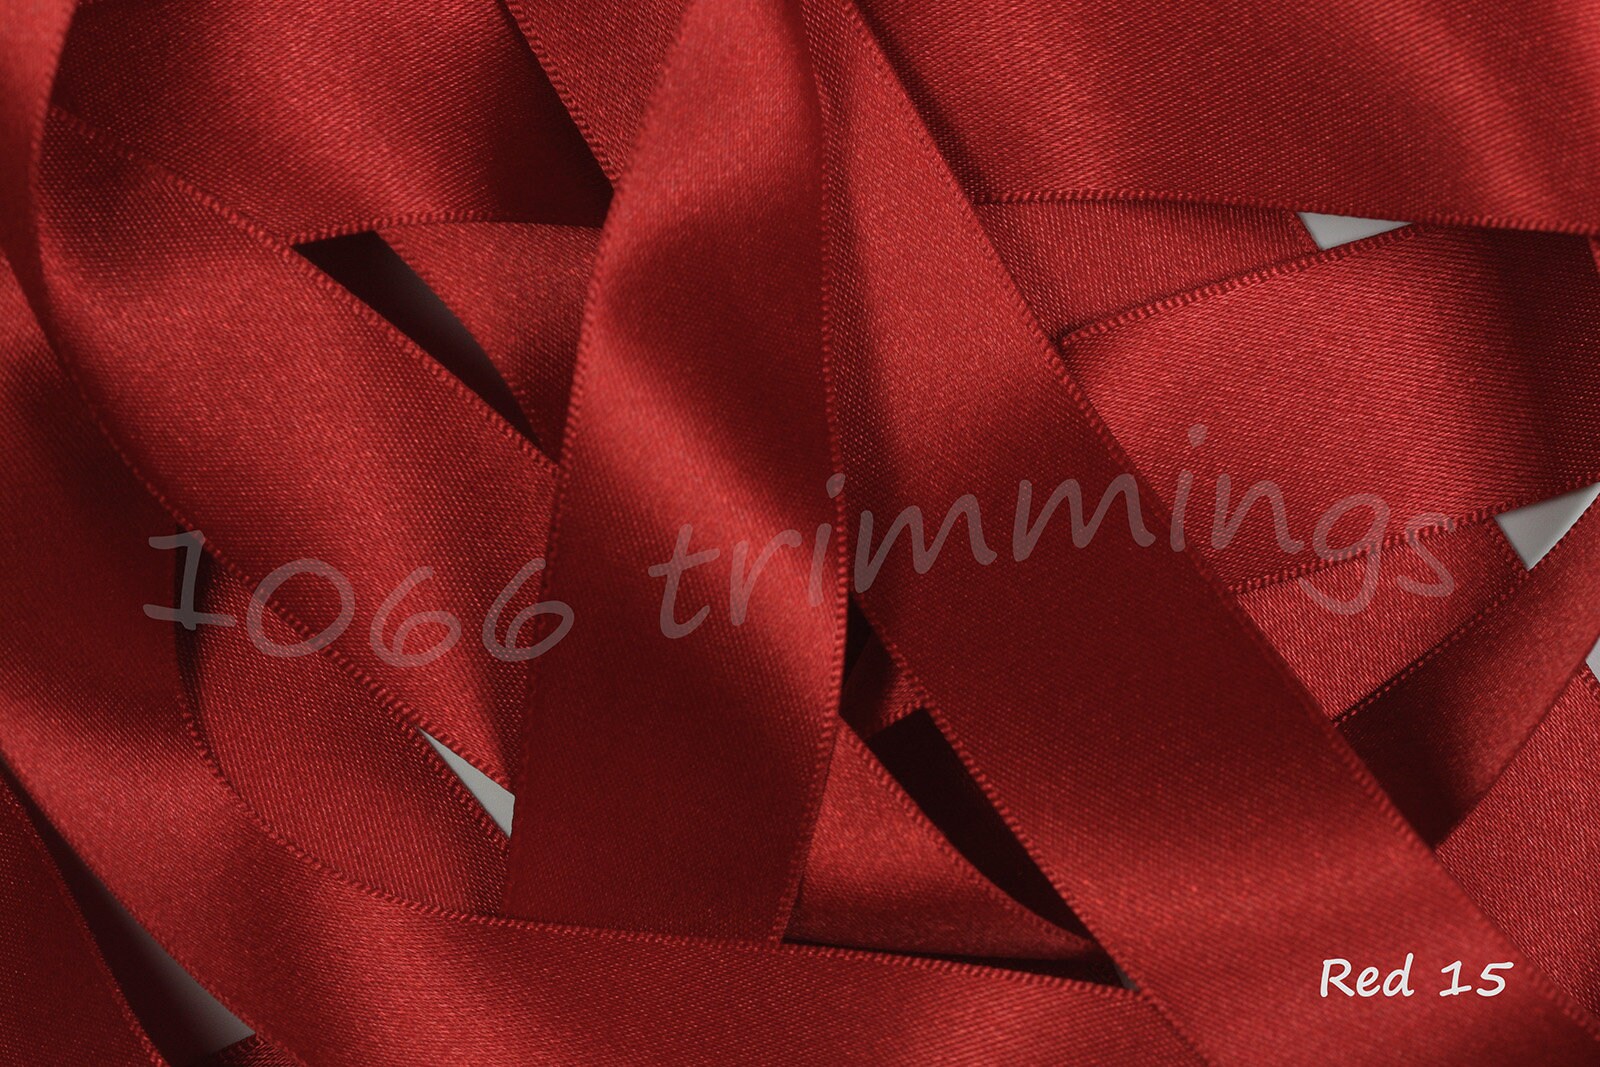 Dark Red Ribbon, Double Faced Satin Ribbon, Widths Available: 1 1/2, 1,  6/8, 5/8, 3/8, 1/4, 1/8